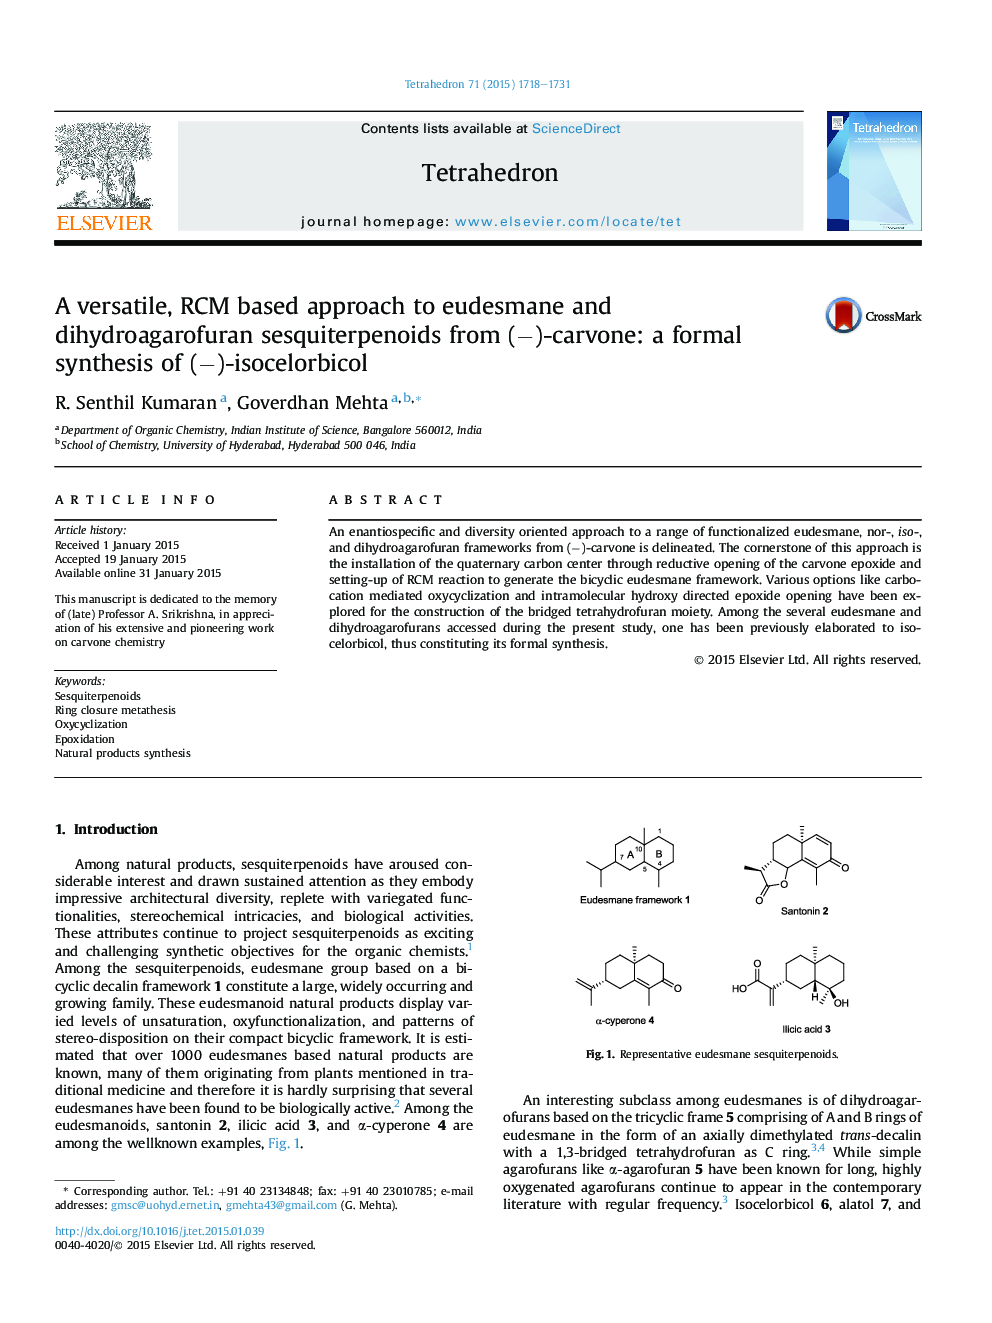 A versatile, RCM based approach to eudesmane and dihydroagarofuran sesquiterpenoids from (â)-carvone: a formal synthesis of (â)-isocelorbicol